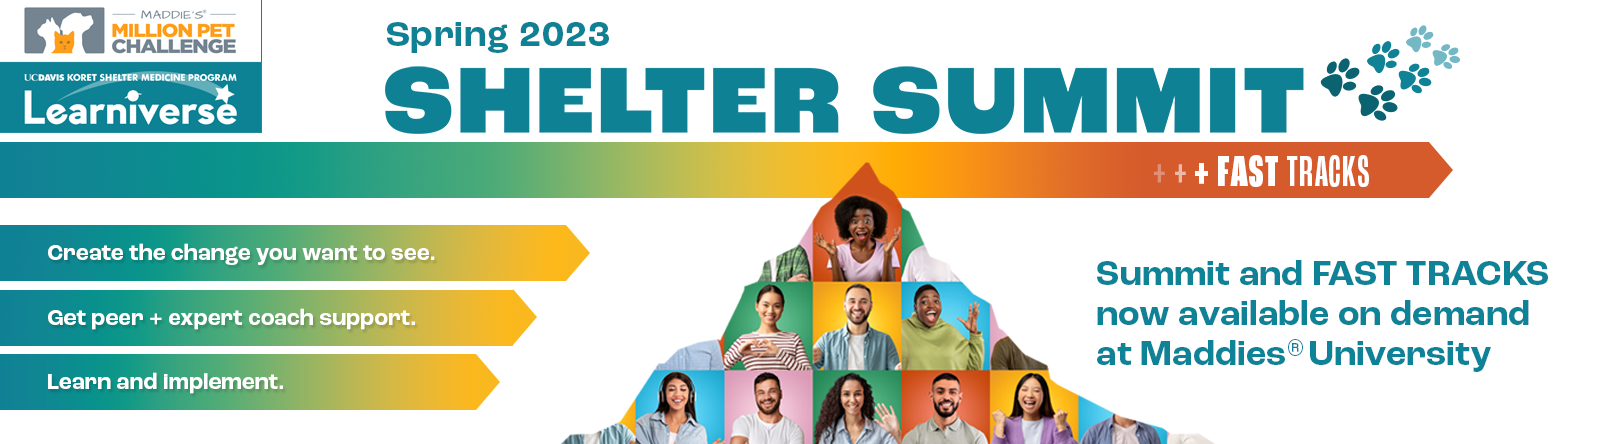 Shelter Summit and Fast Tracks are now available on demand on Maddie's University.